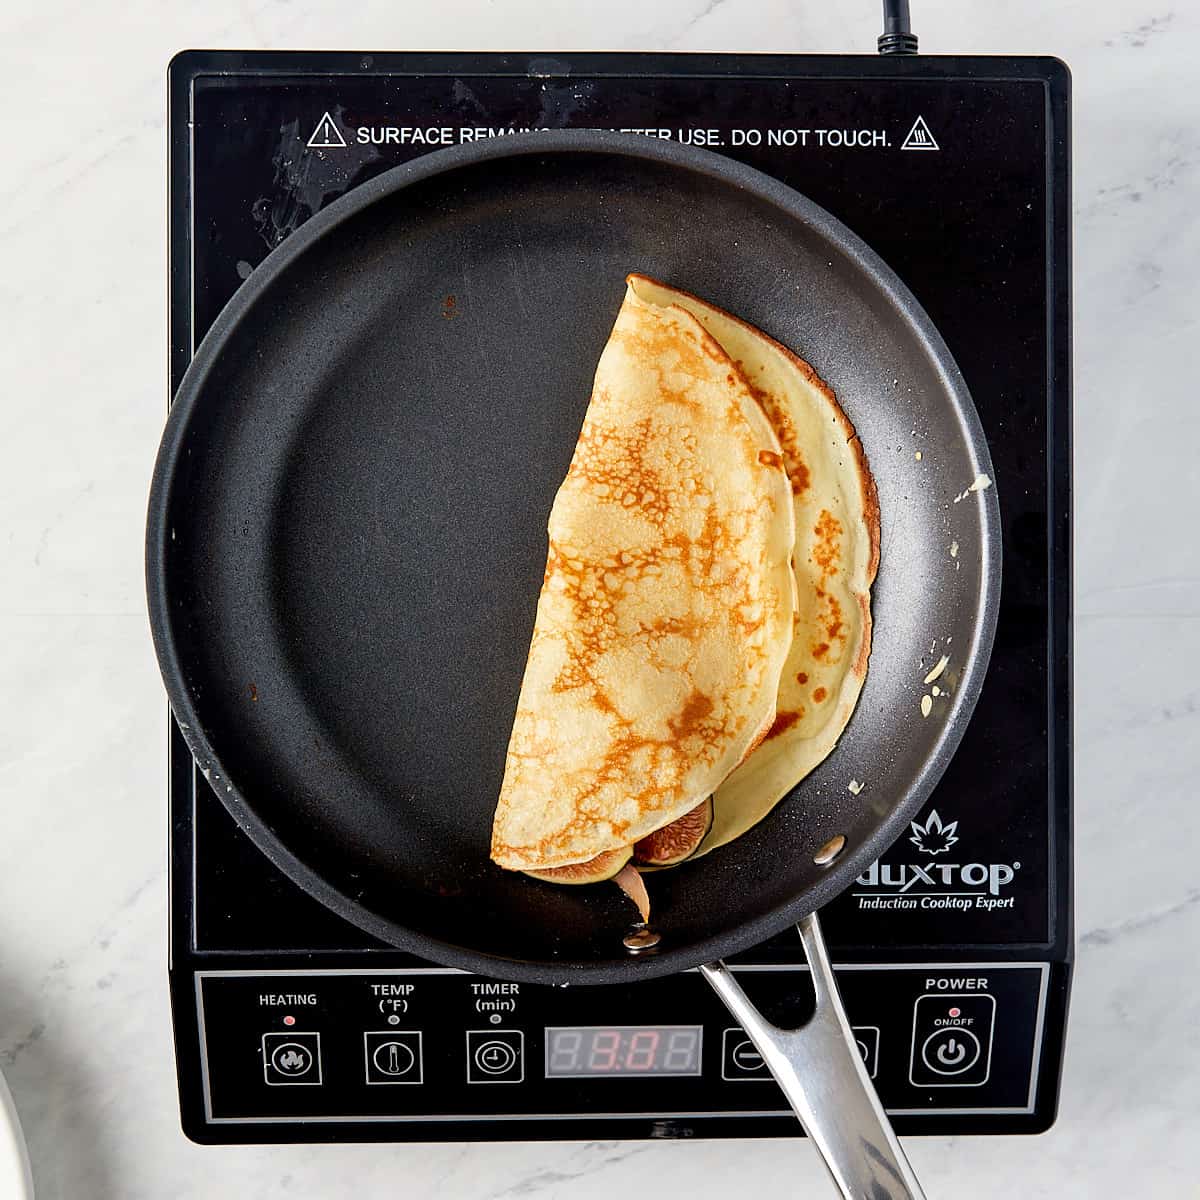 crepe being folded in half in a pan on a cooktop